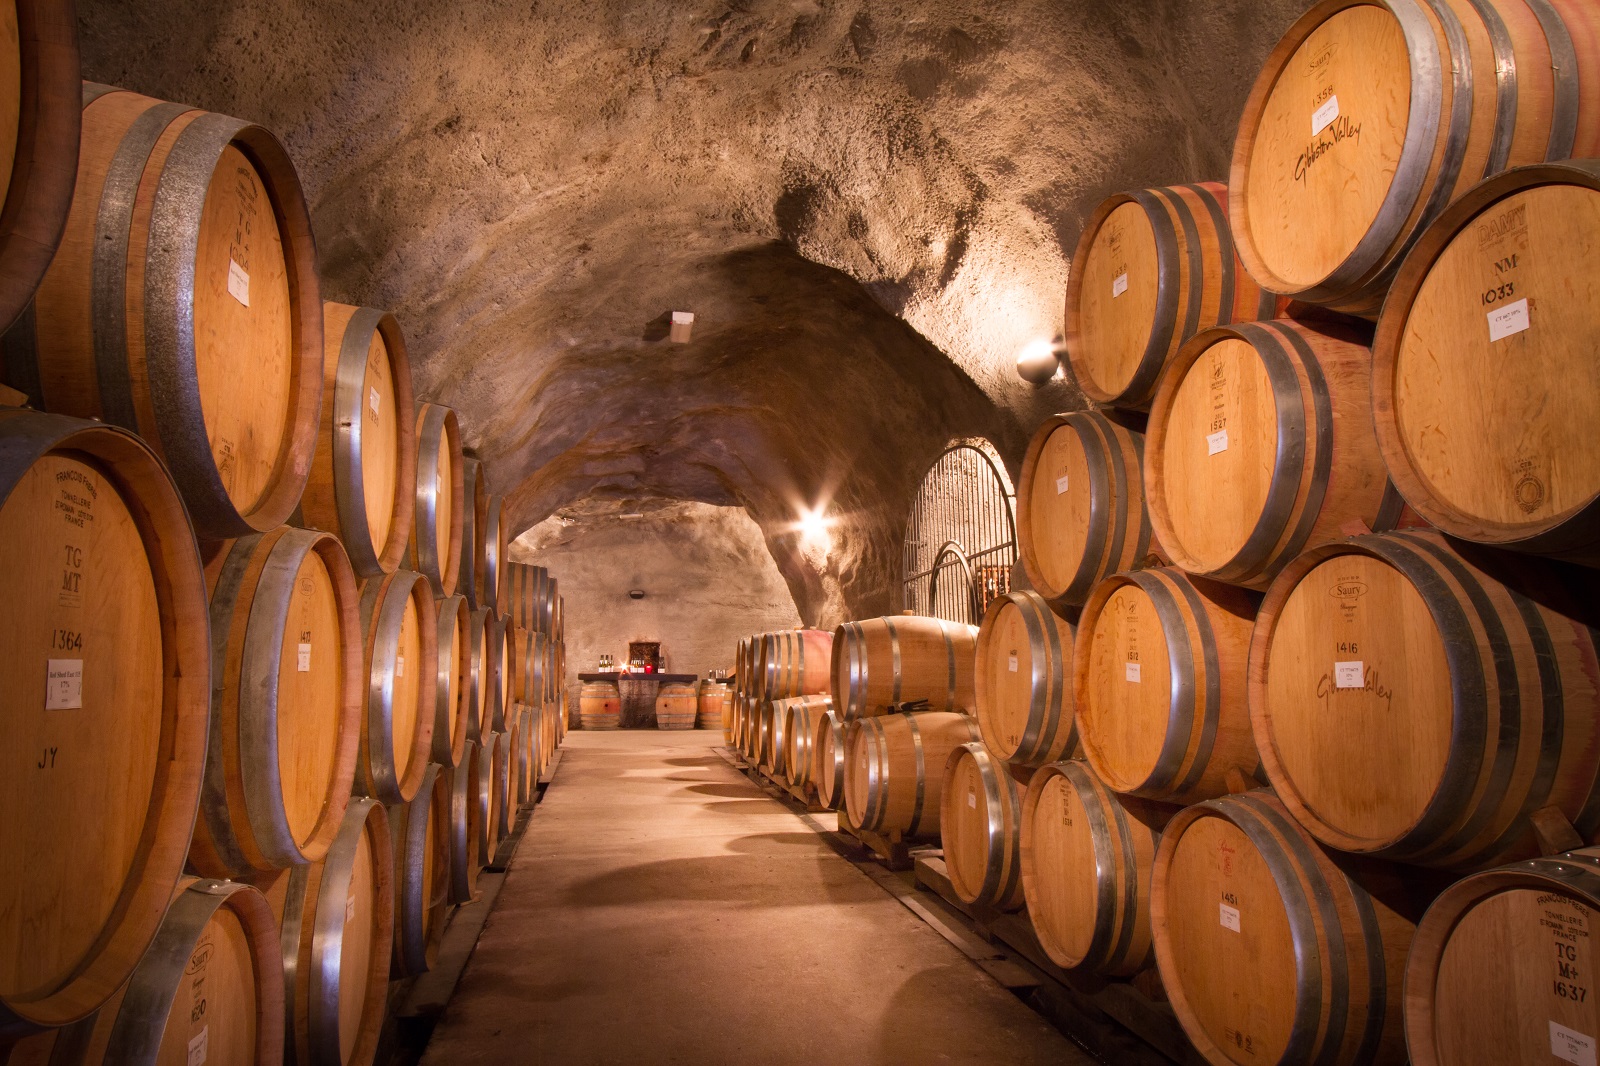 Stacked wine barrels in the cave at Gibbston Valley Cave, Central Otago.